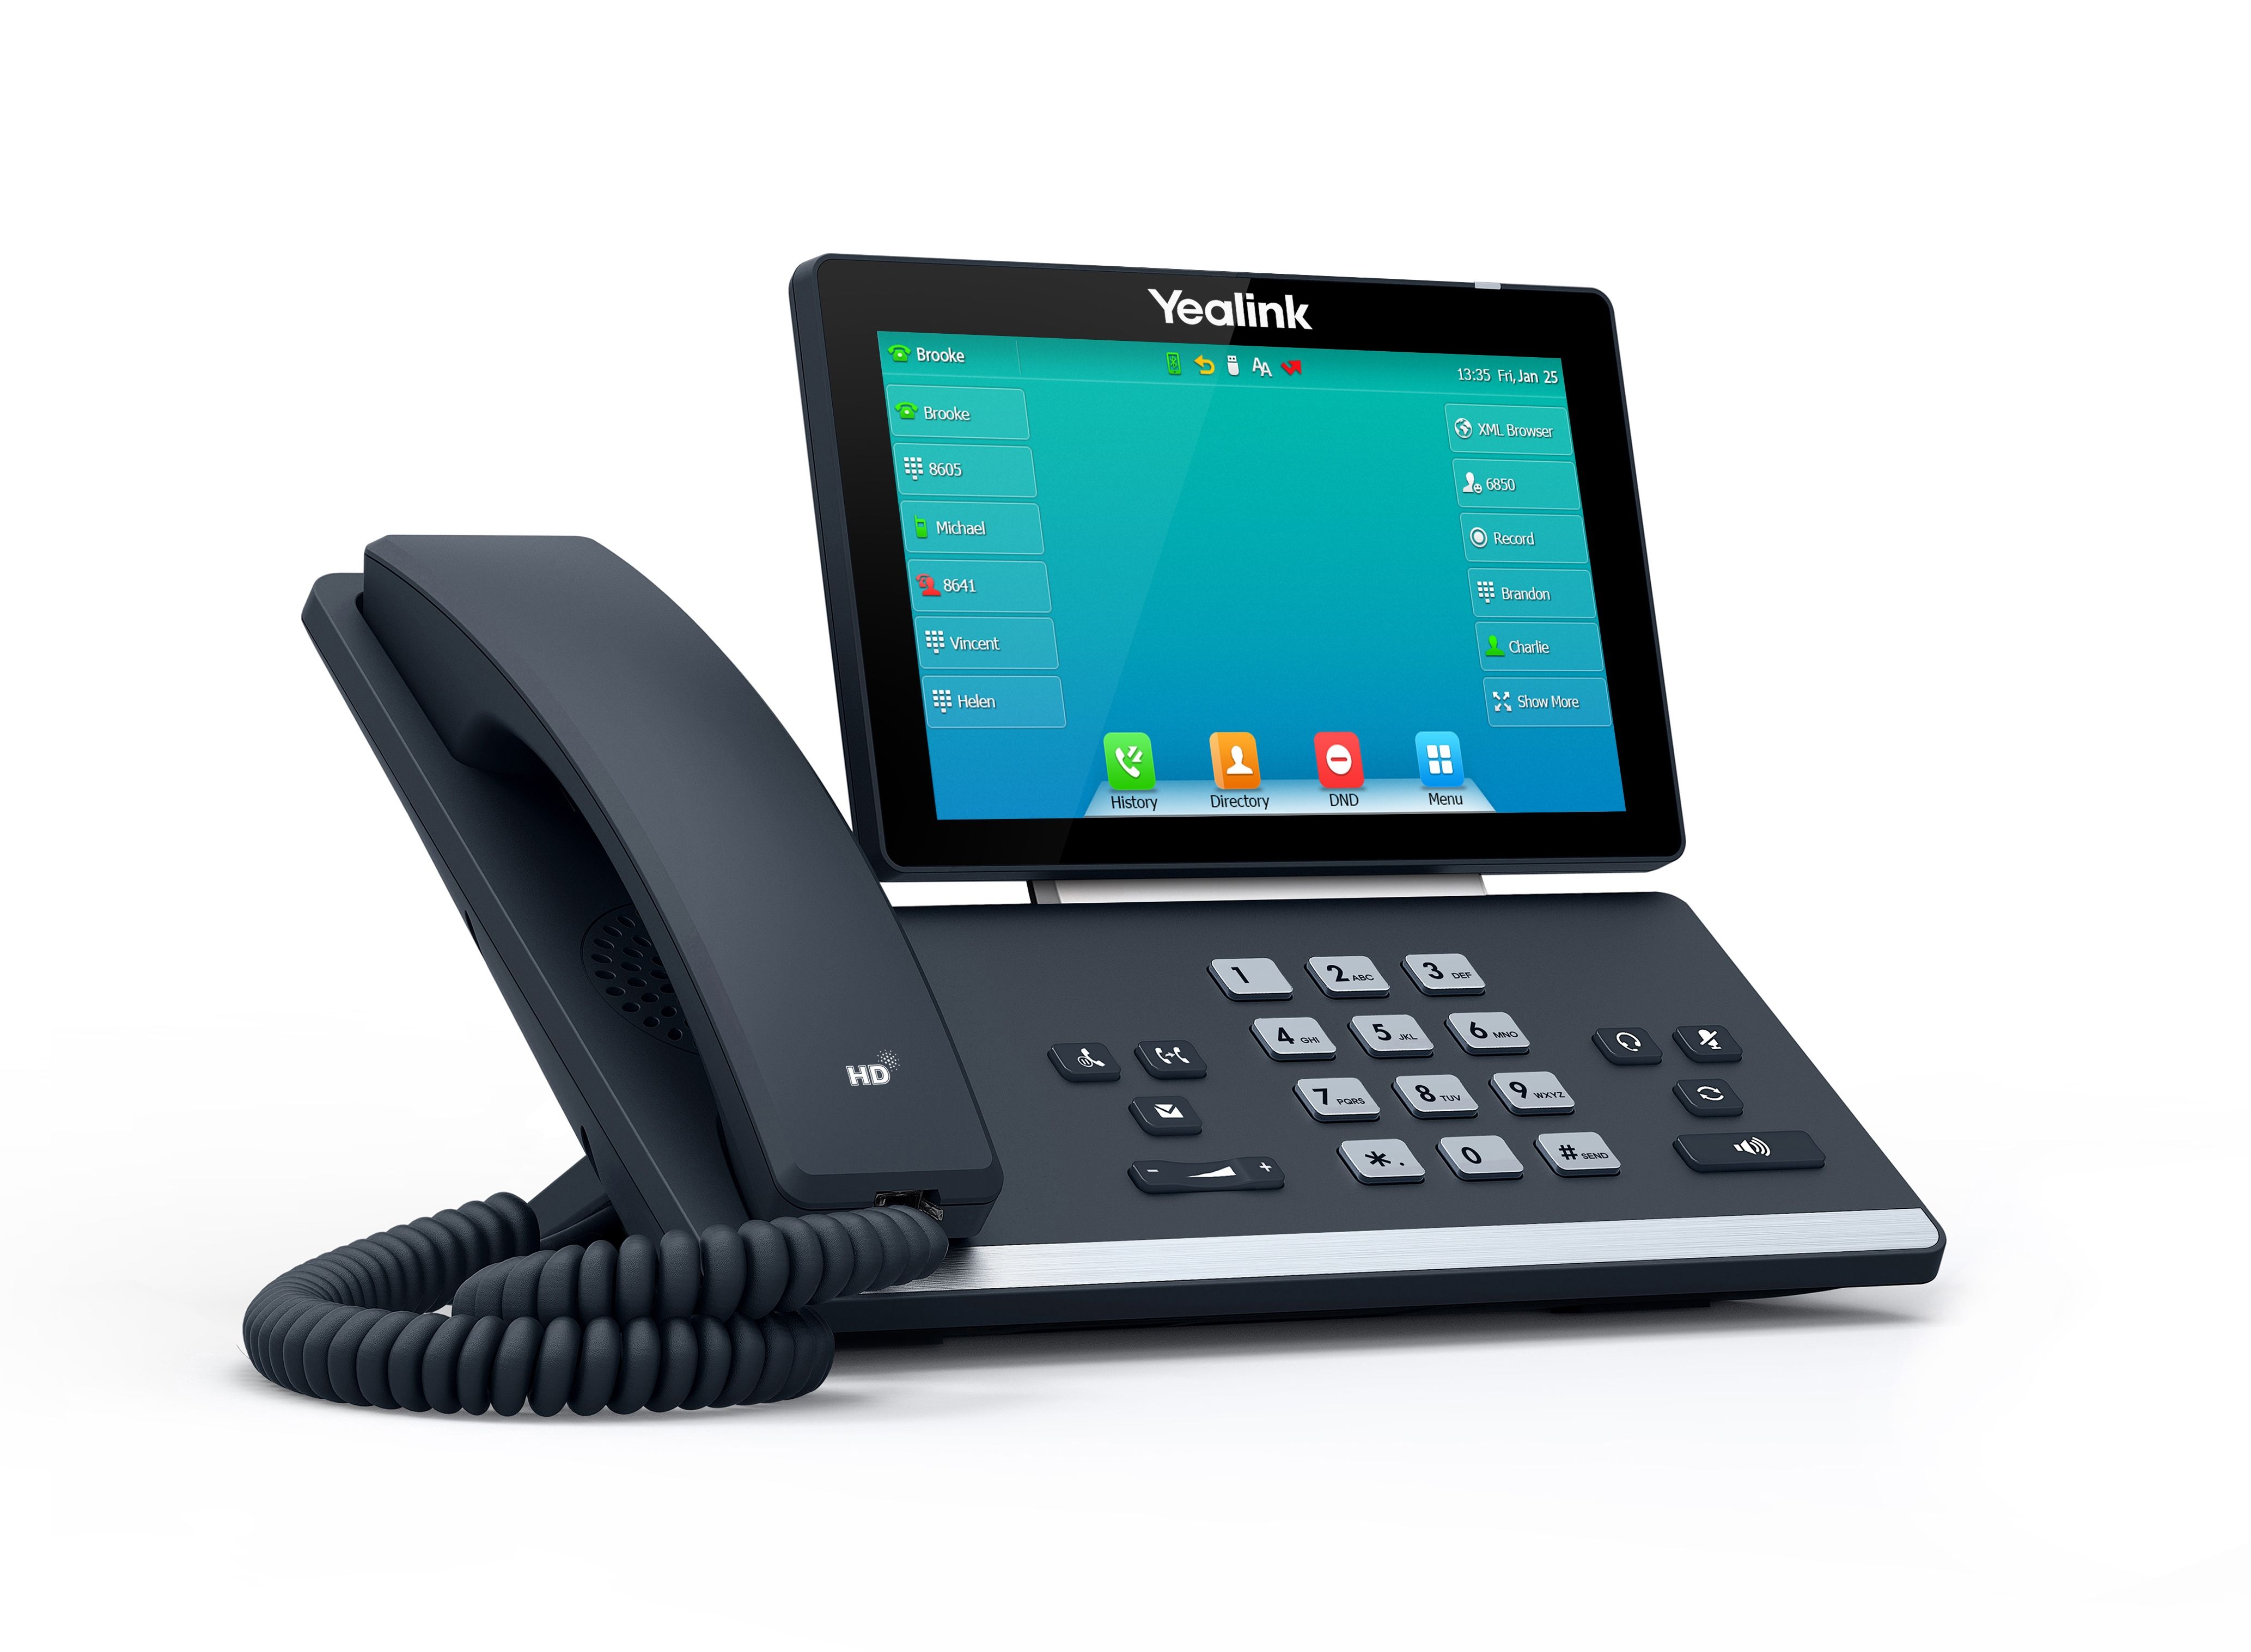 Yealink SIP-T57W Premium IP Phone w/ built-in Bluetooth and Wi-Fi 1301089 (841885103772) photo